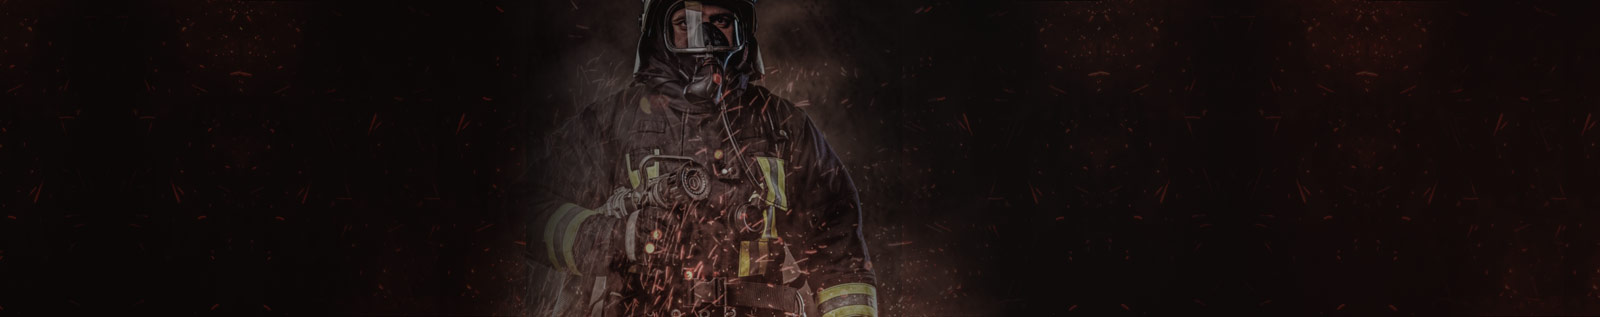 Stay Protected with Fireproof Gloves: Top Options at Gillani.co!